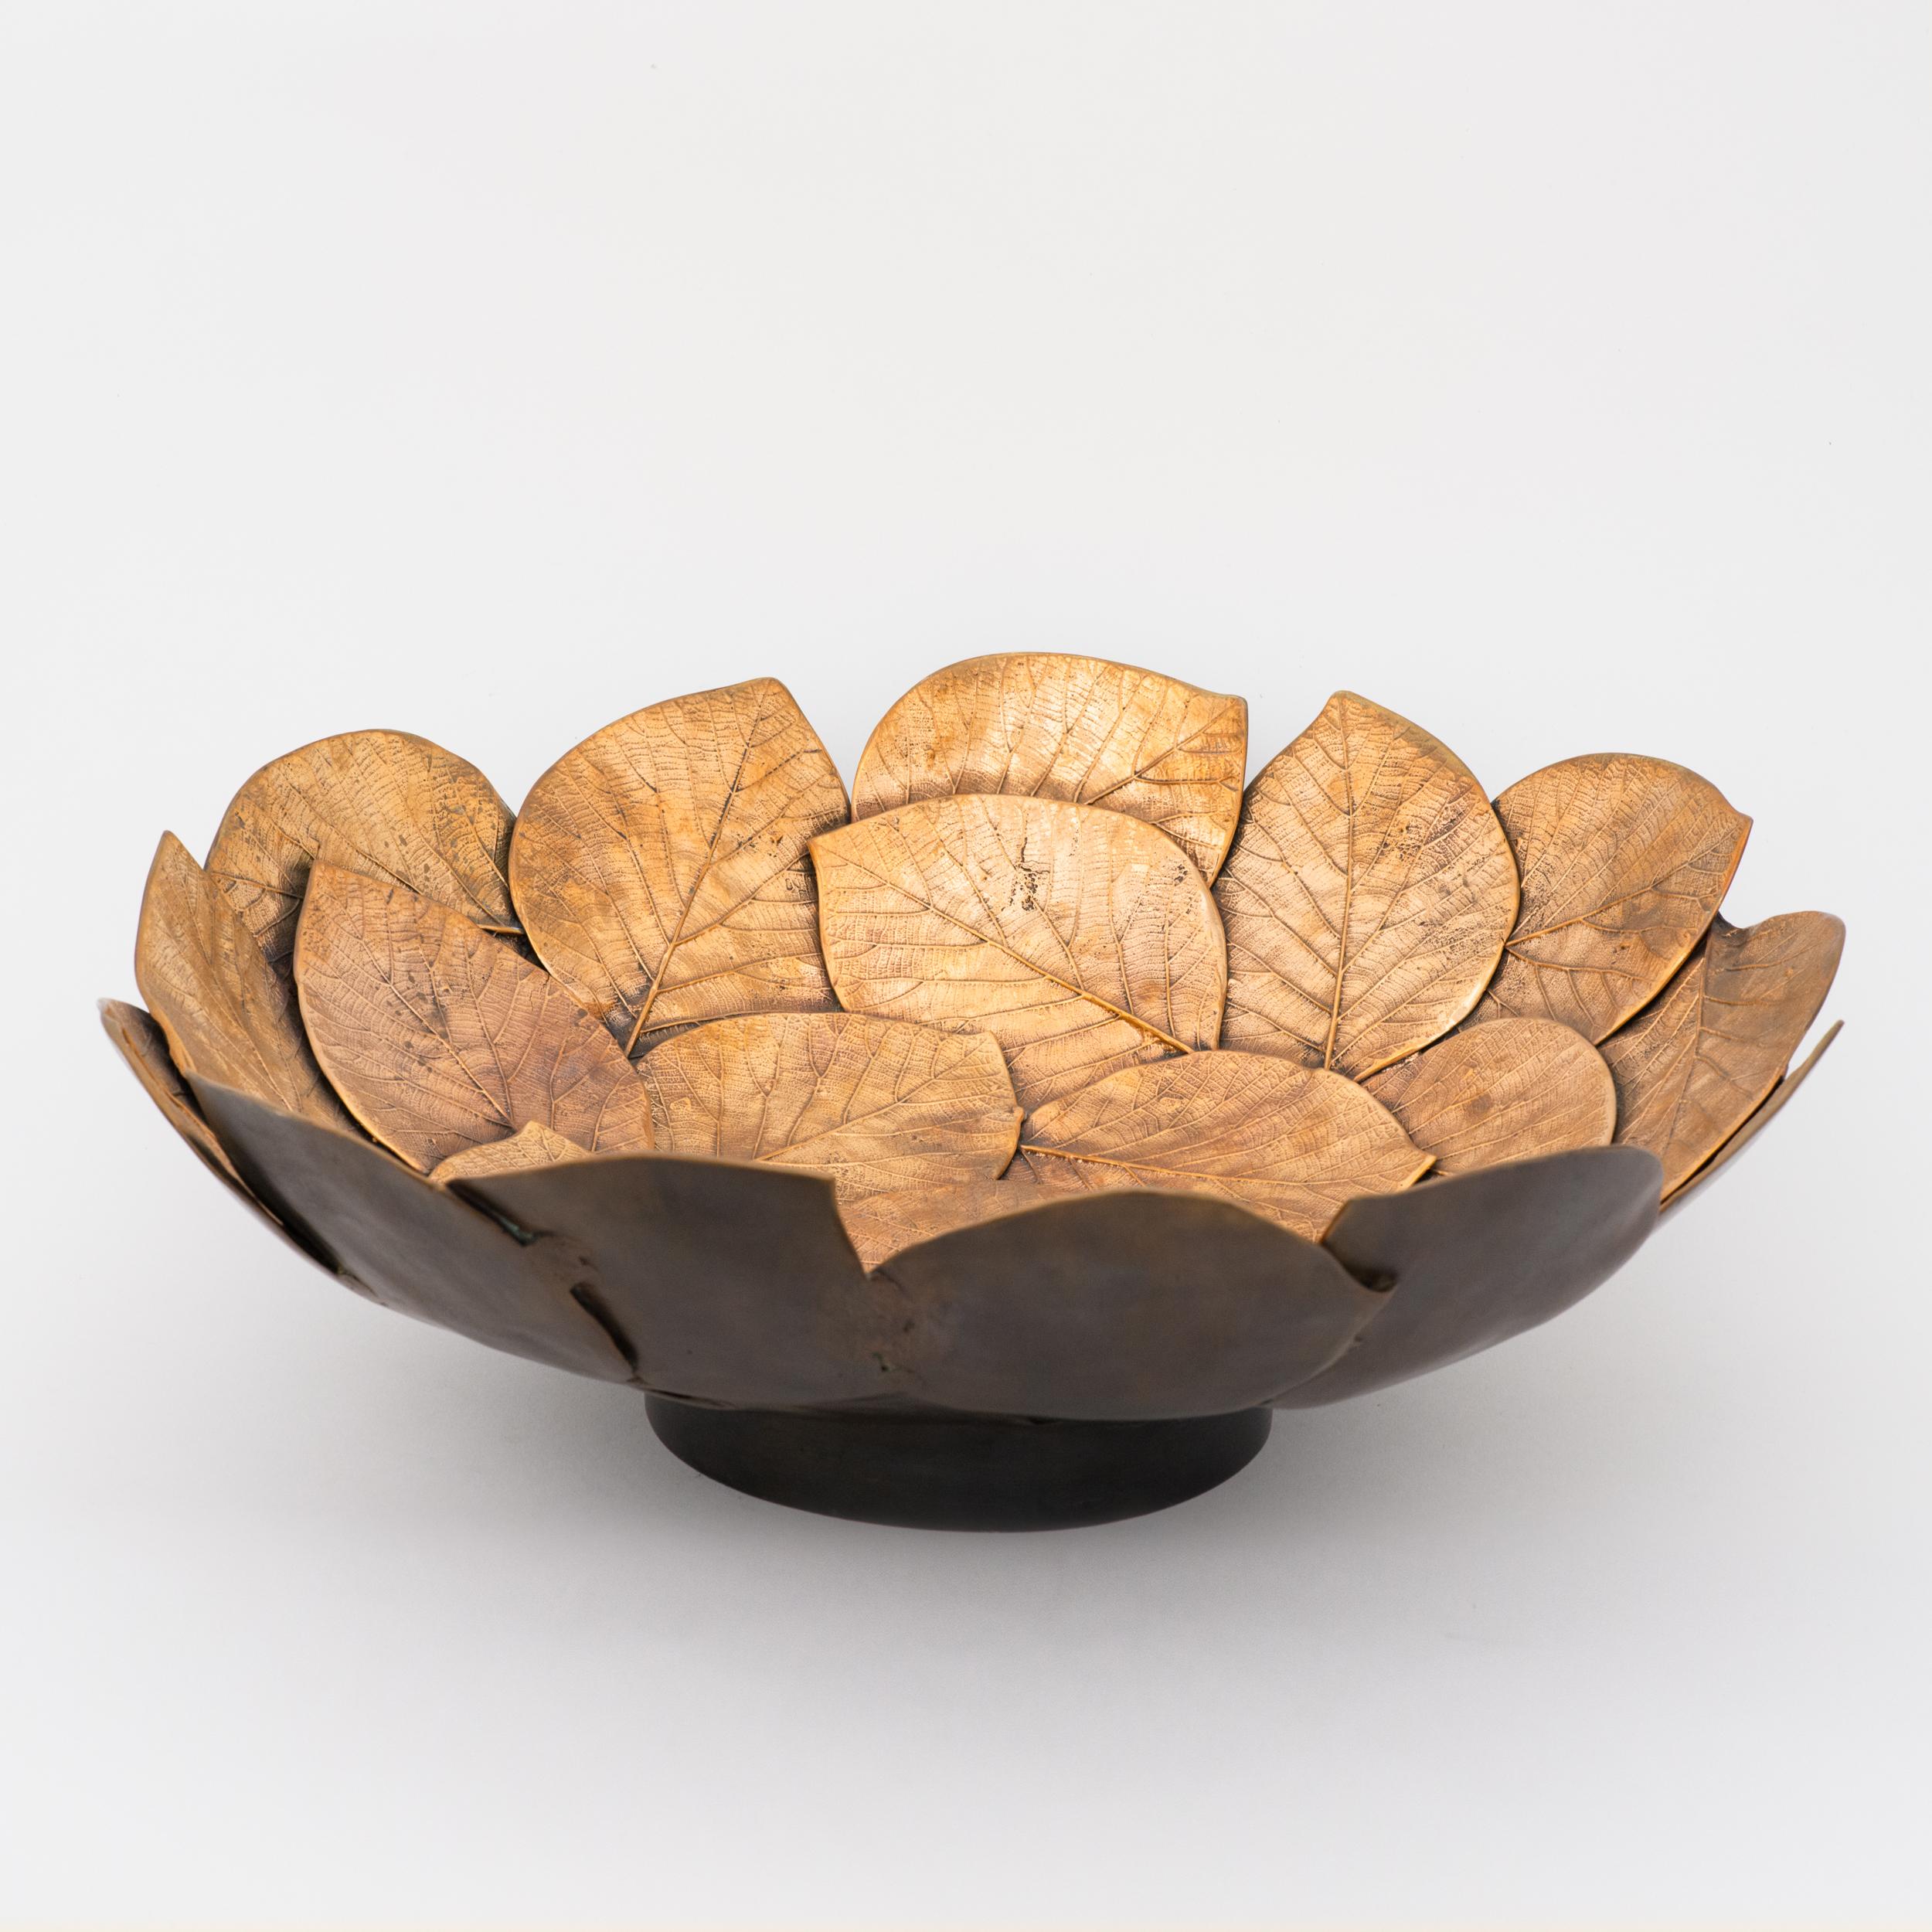 Unique and exquisite brass cast leaf bowl. Handmade using highly skilled and specialised traditional processes to create an original and sumptuous piece.

Slight variations in the patina and polished finishes, patterns and sizes are characteristics